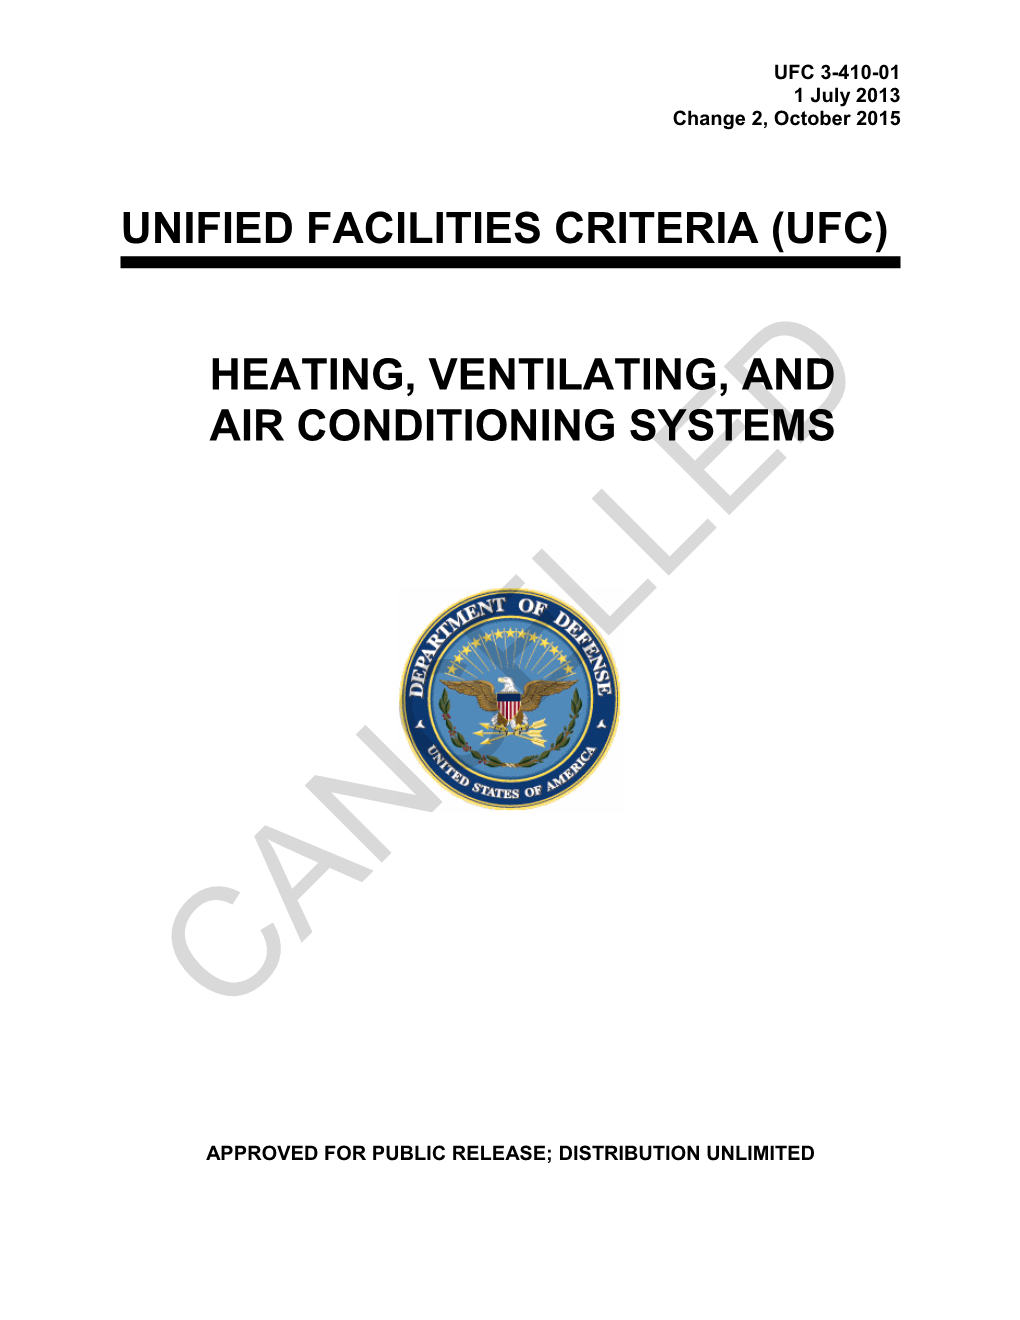 UFC 3-410-01 Heating, Ventilating, and Air Conditioning Systems, with Change 2